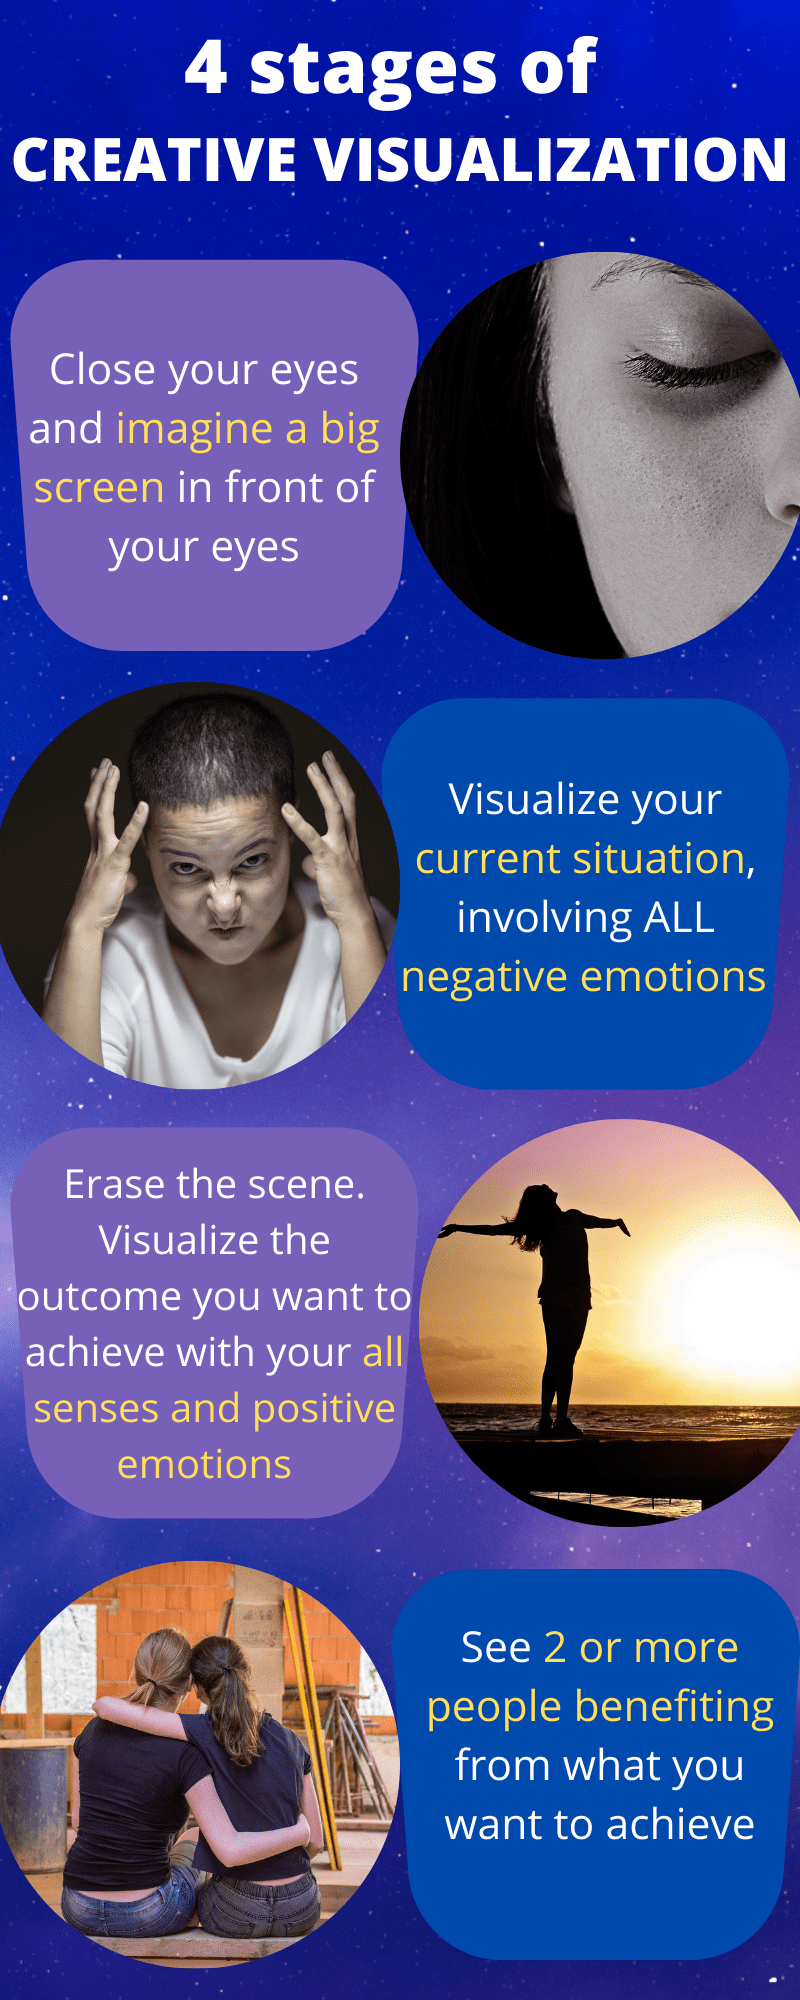 4 stages of CREATIVE VISUALIZATION1